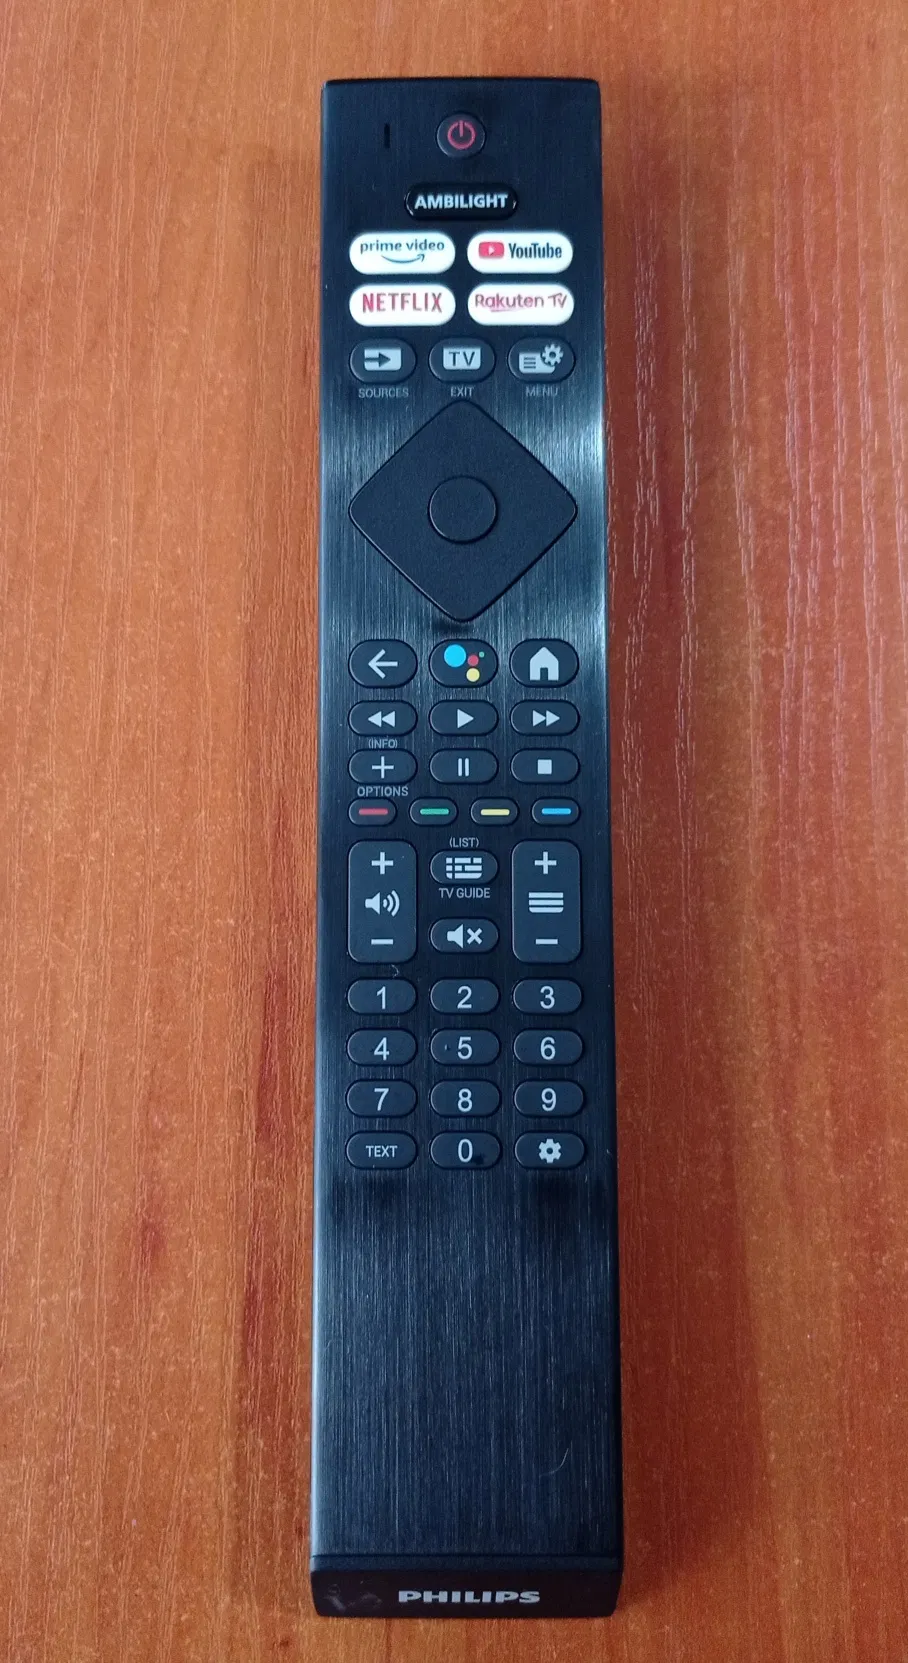 TV PHILIPS remote control.996592300991 REMOTE PHILIPS YKF474-BT27 ENGLISH &+RF Parts of TVs, gate air controls, etc.